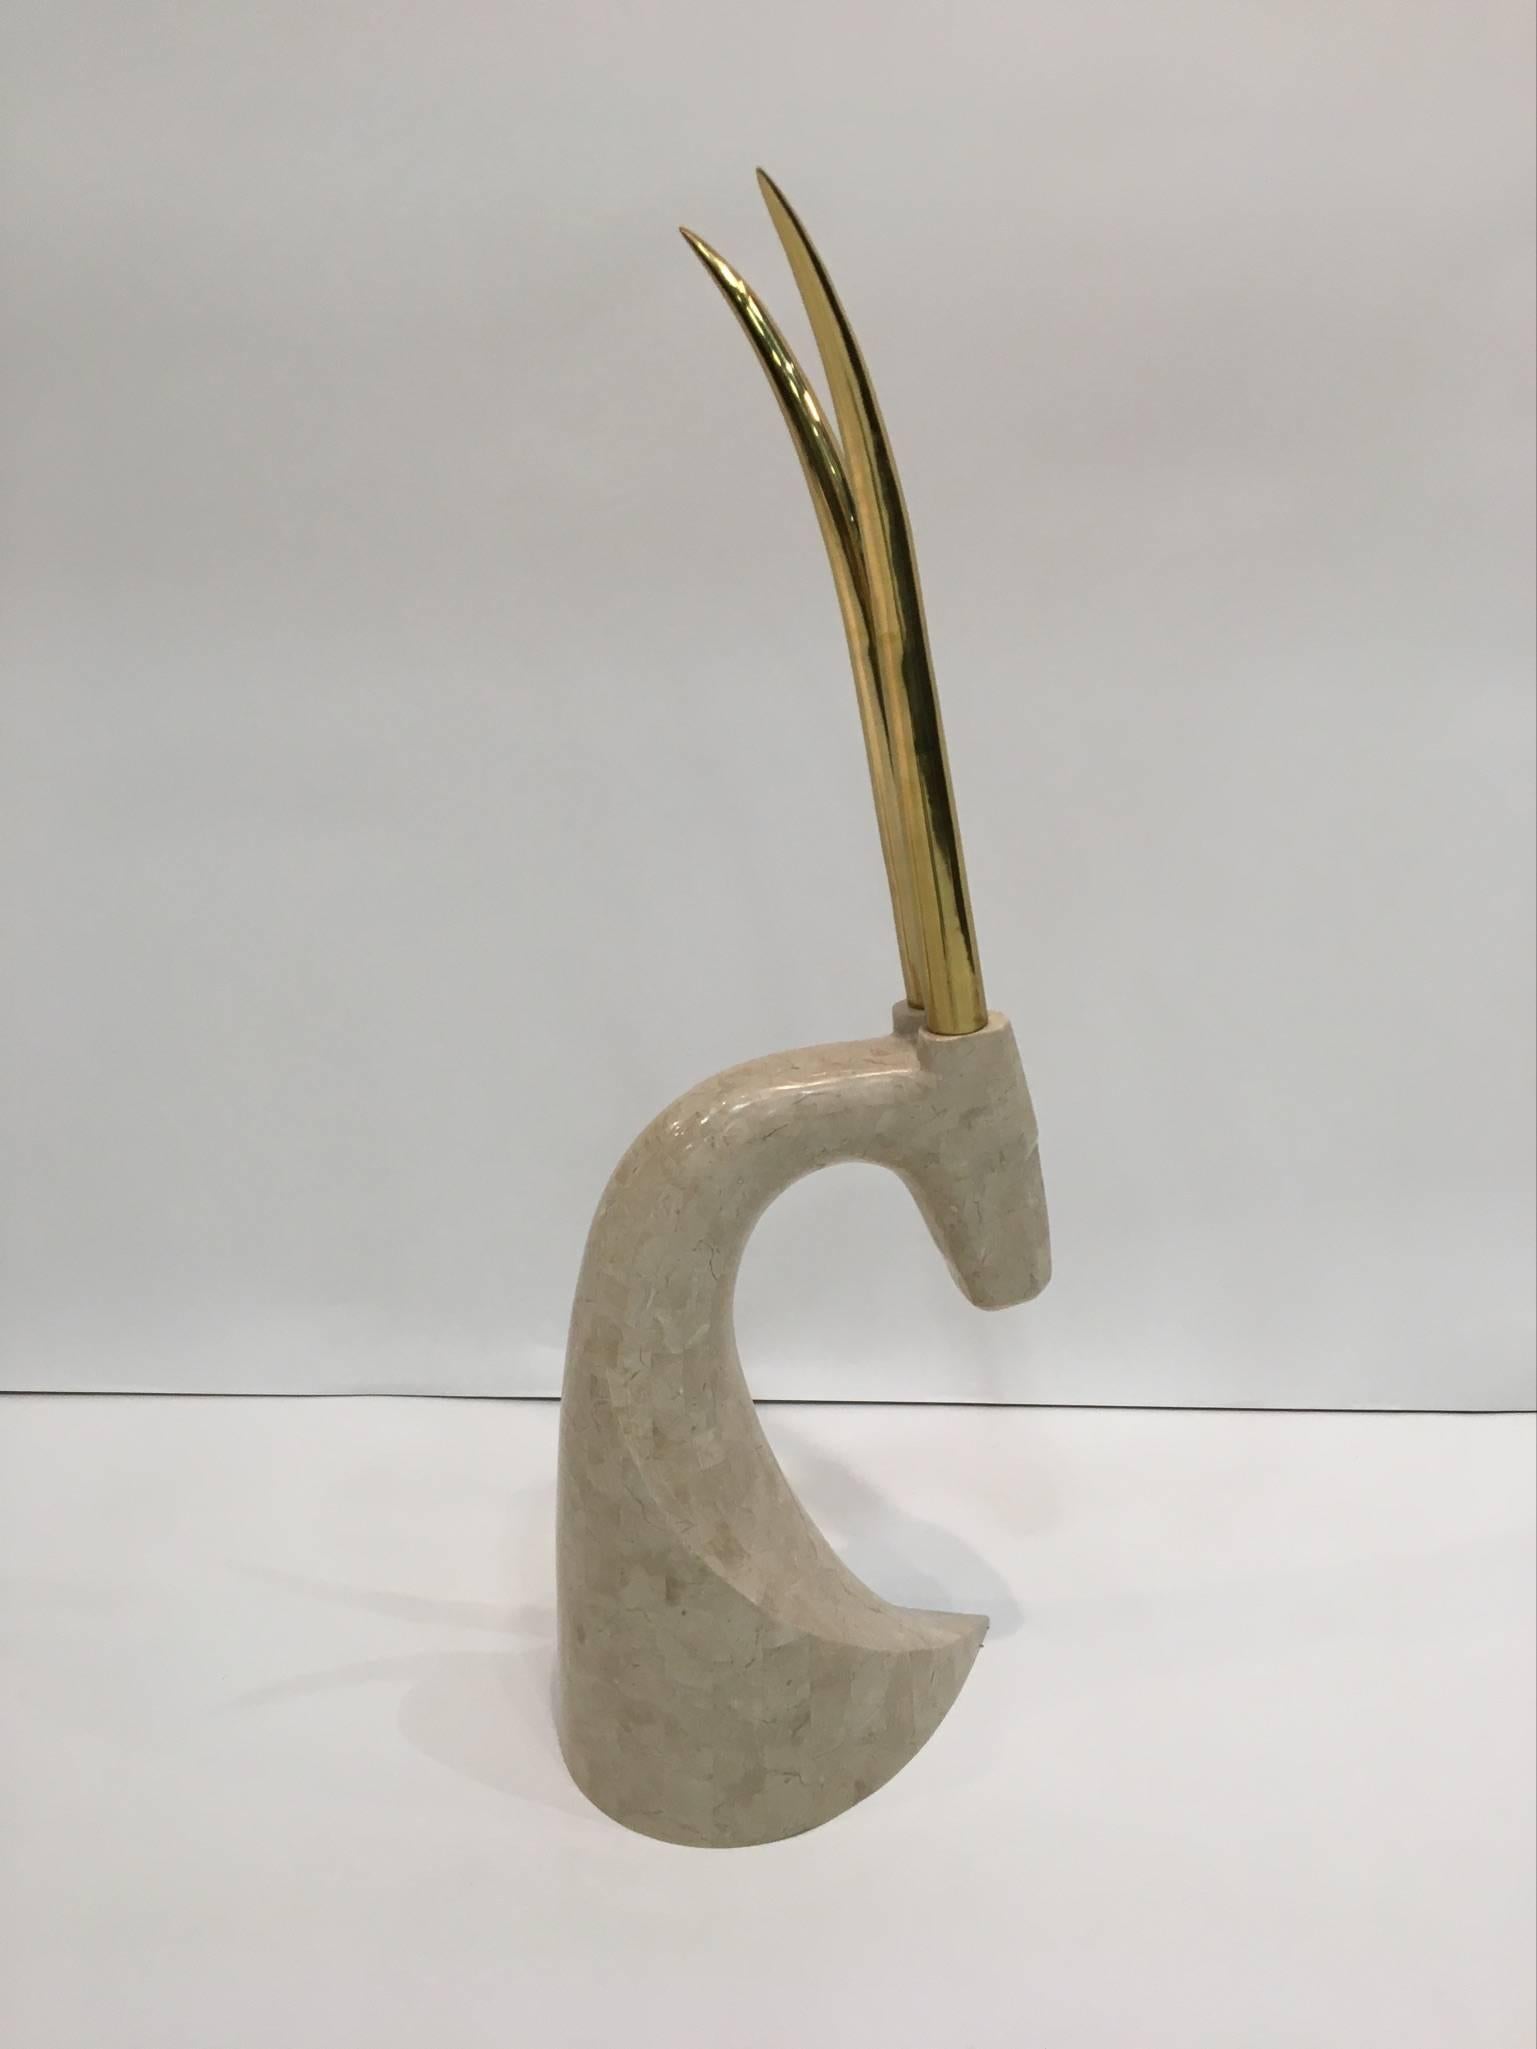 A glamorous tessellated polished travertine and polished brass antelope sculpture by Maitland Smith, circa 1970s.
The brass shows some minor age. 
Dimensions: 36